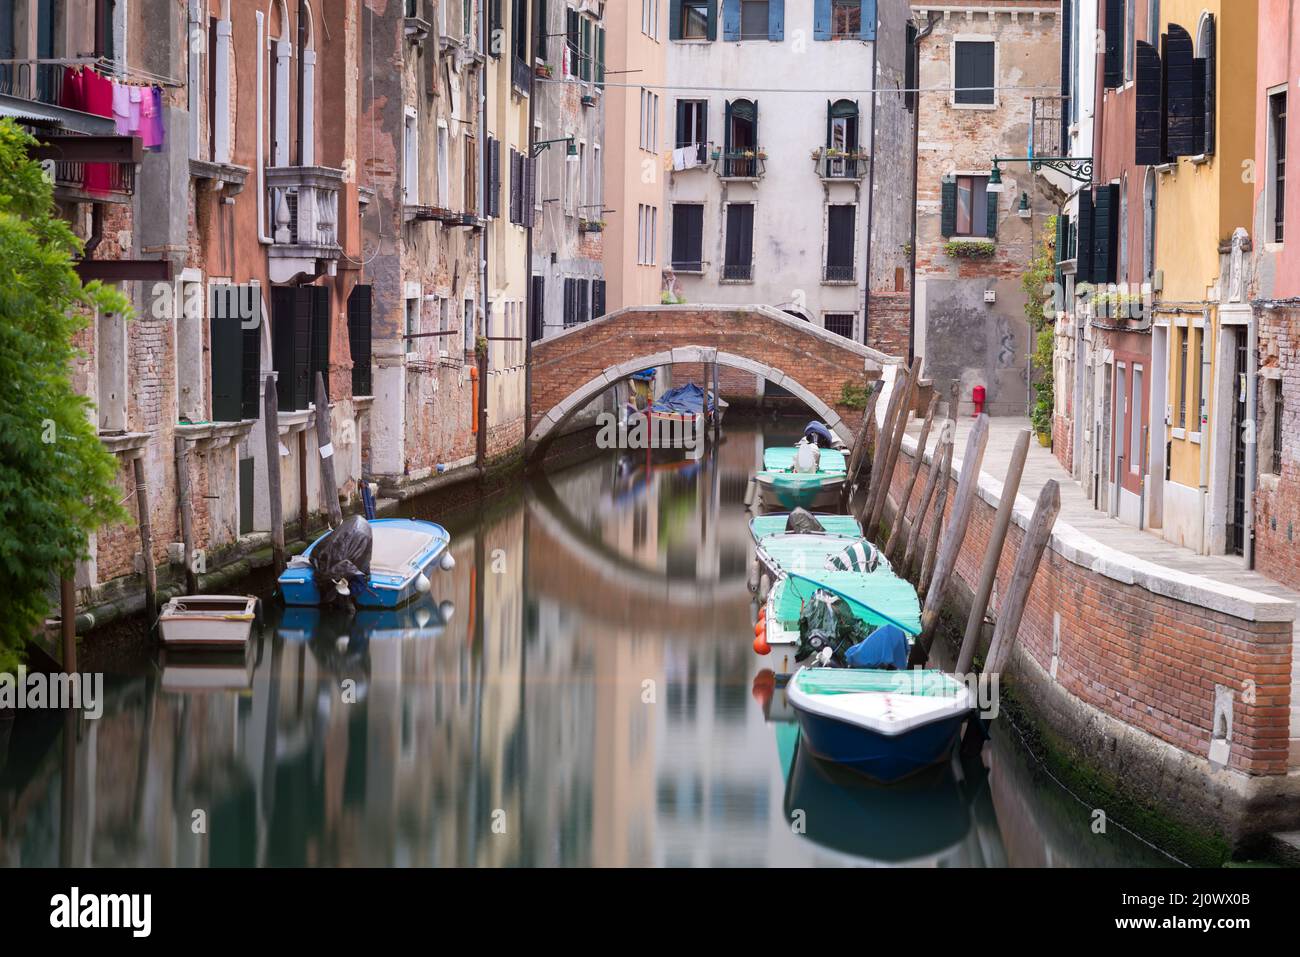 Small canal and bridge between houses in Venice, Italy Stock Photo